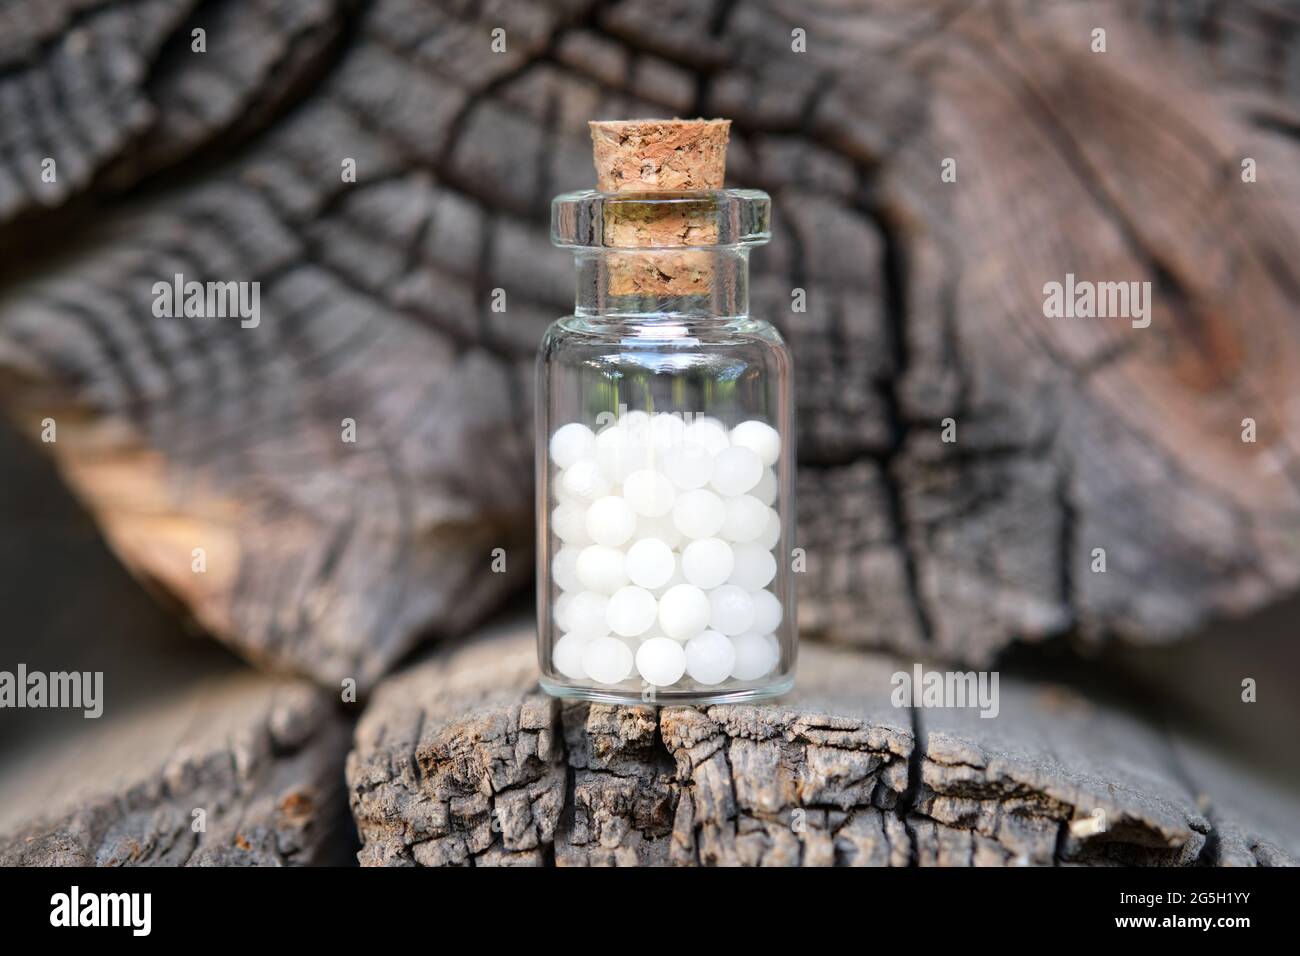 Bottle of homeopathic globules on wooden background. Homeopathy medicine concept. Stock Photo